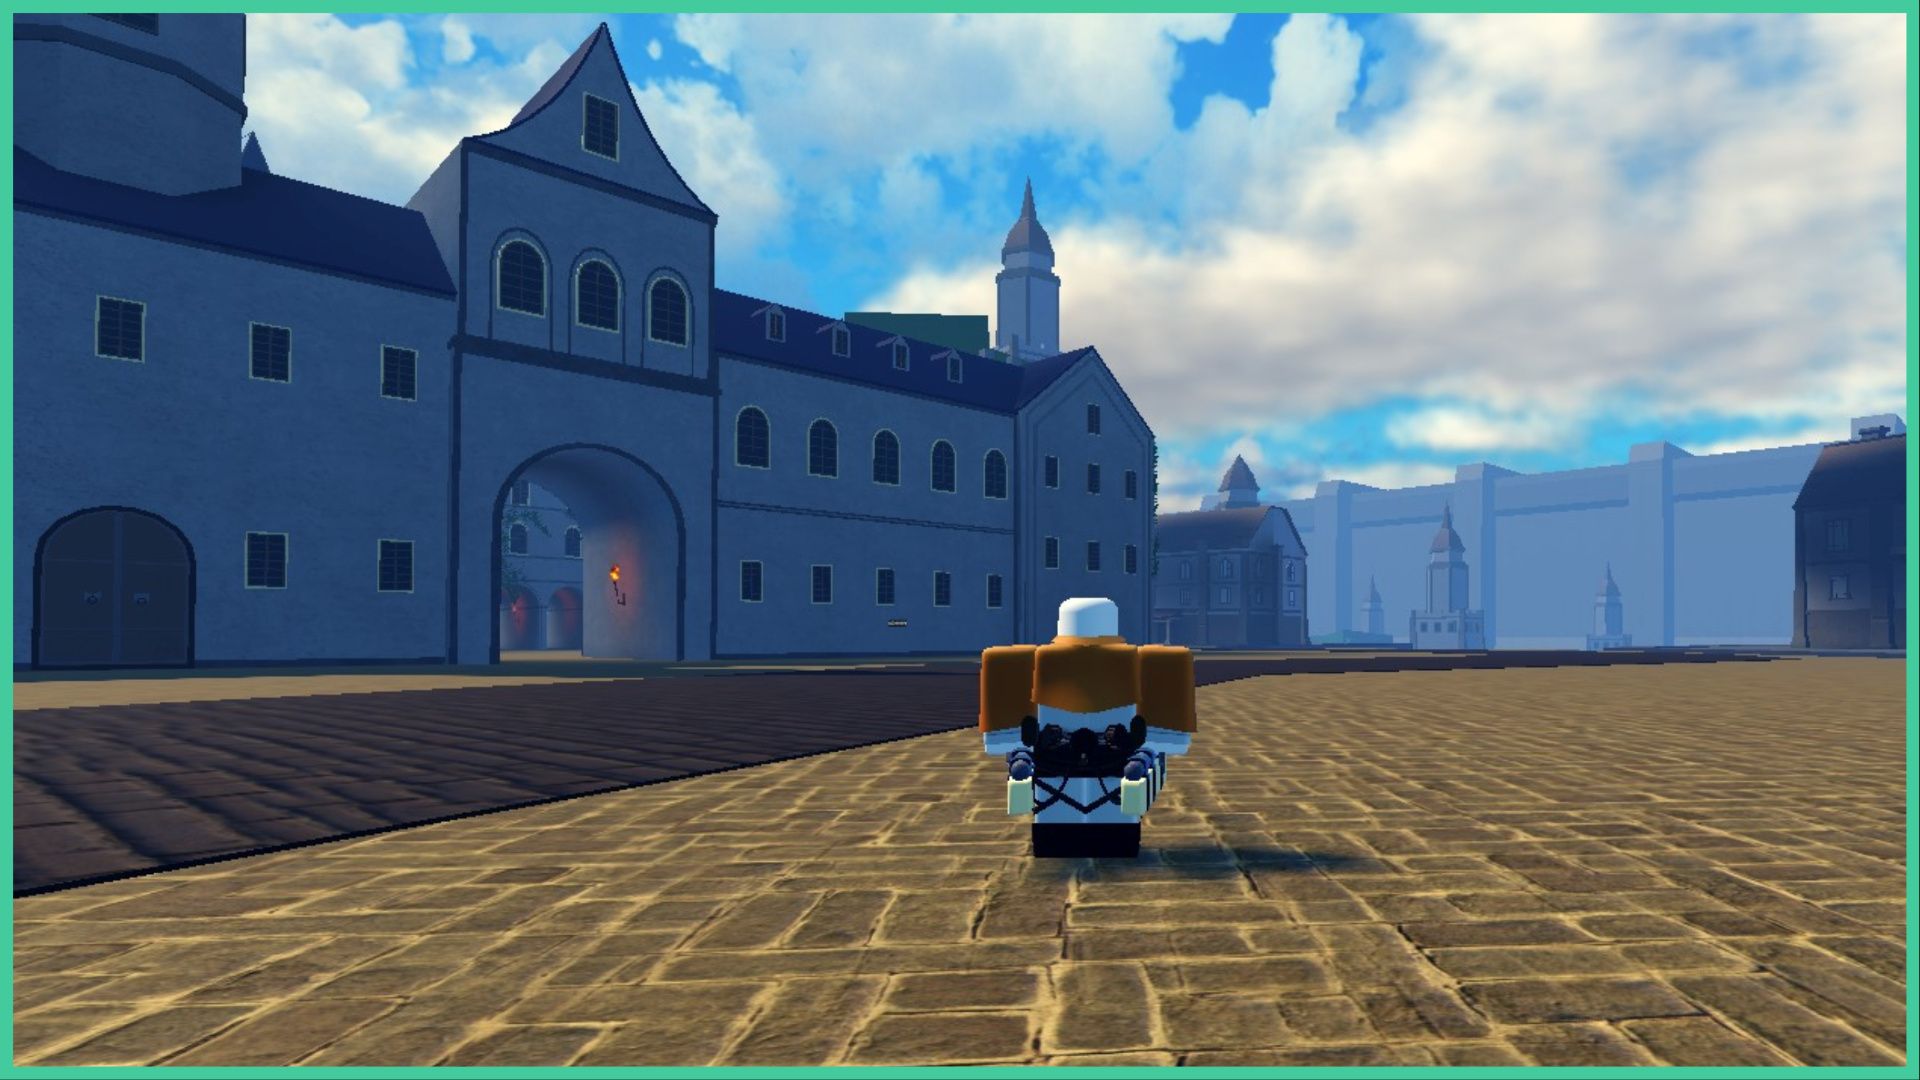 feature image for our untitled attack on titan clan tier list, the image features a screenshot from the game of the free roam game mode as a roblox character dressed in scout gear stands looking out at the tall old-style buildings with clouds in the sky